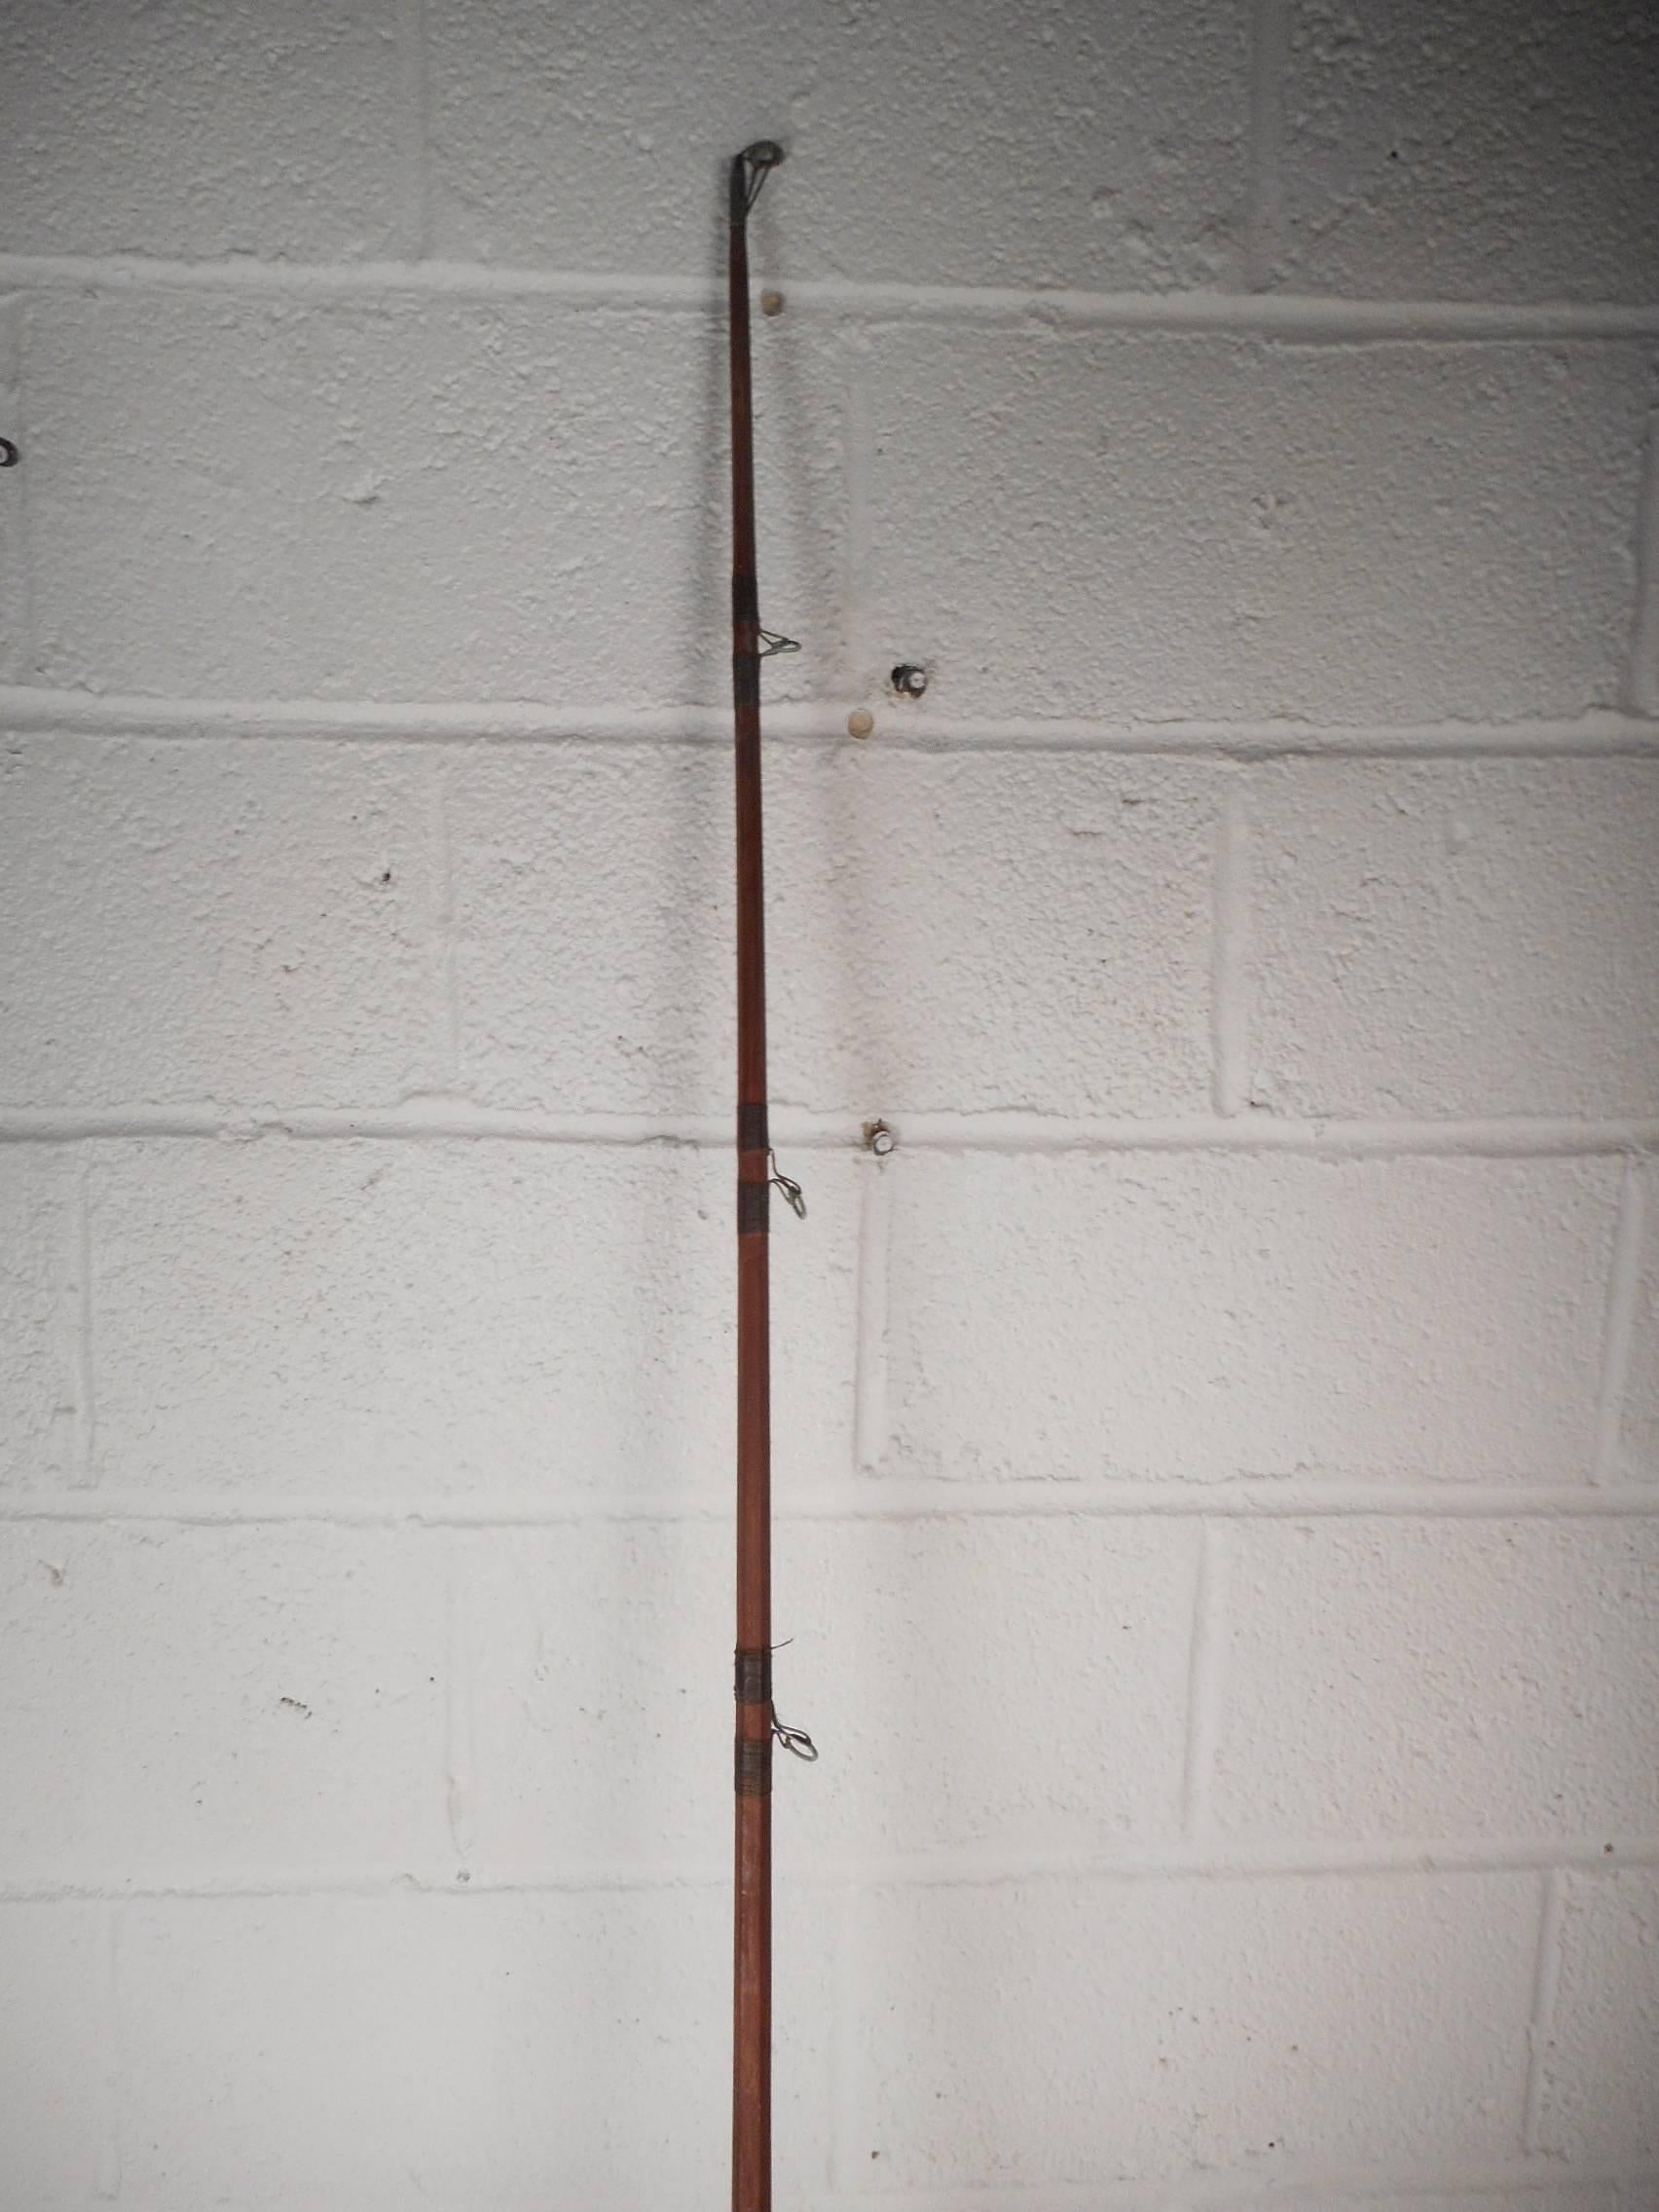 This wonderful vintage fishing pole has a heavy brass rig with a blonde wood handle on the crank. Quality craftsmanship with a wooden grip and a sturdy pole. This gorgeous nautical decorative piece looks great hanging on the wall in any home,